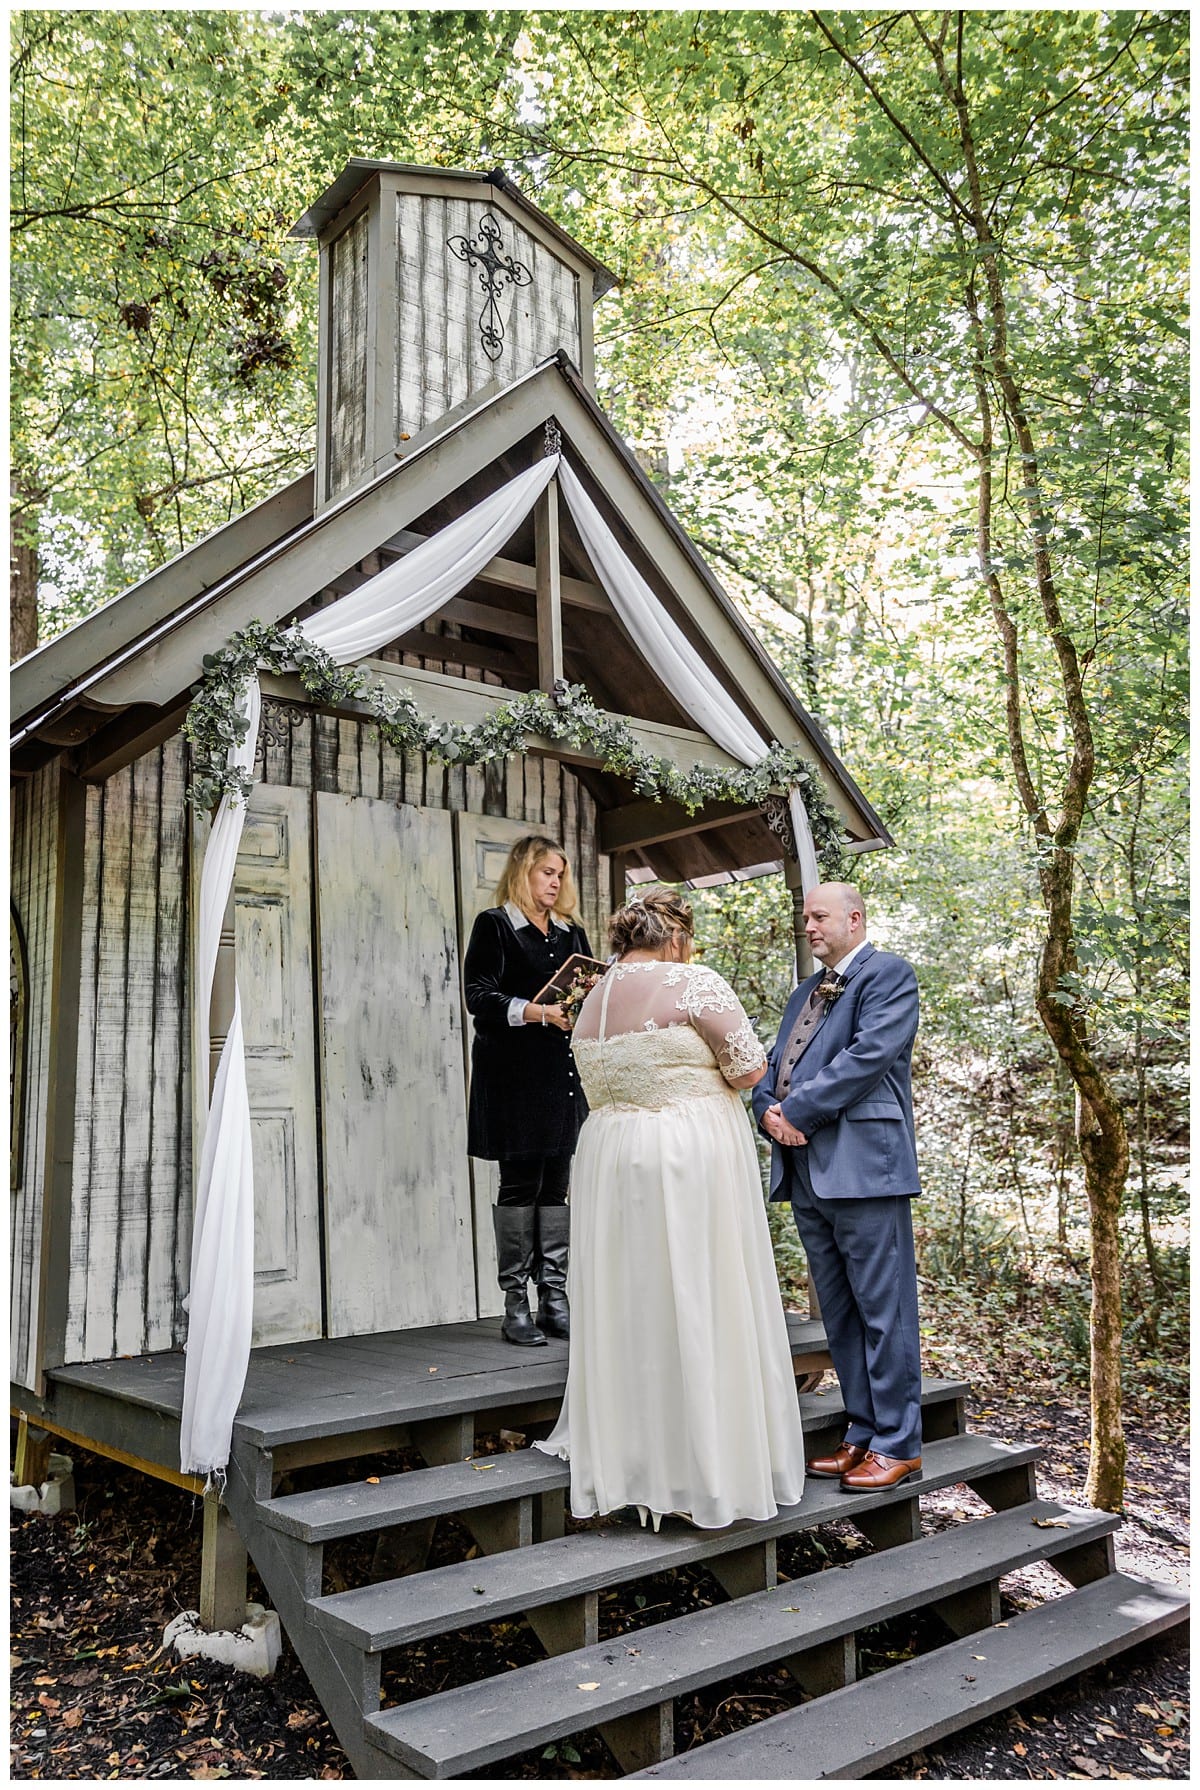 Eloping in the Smoky Mountains